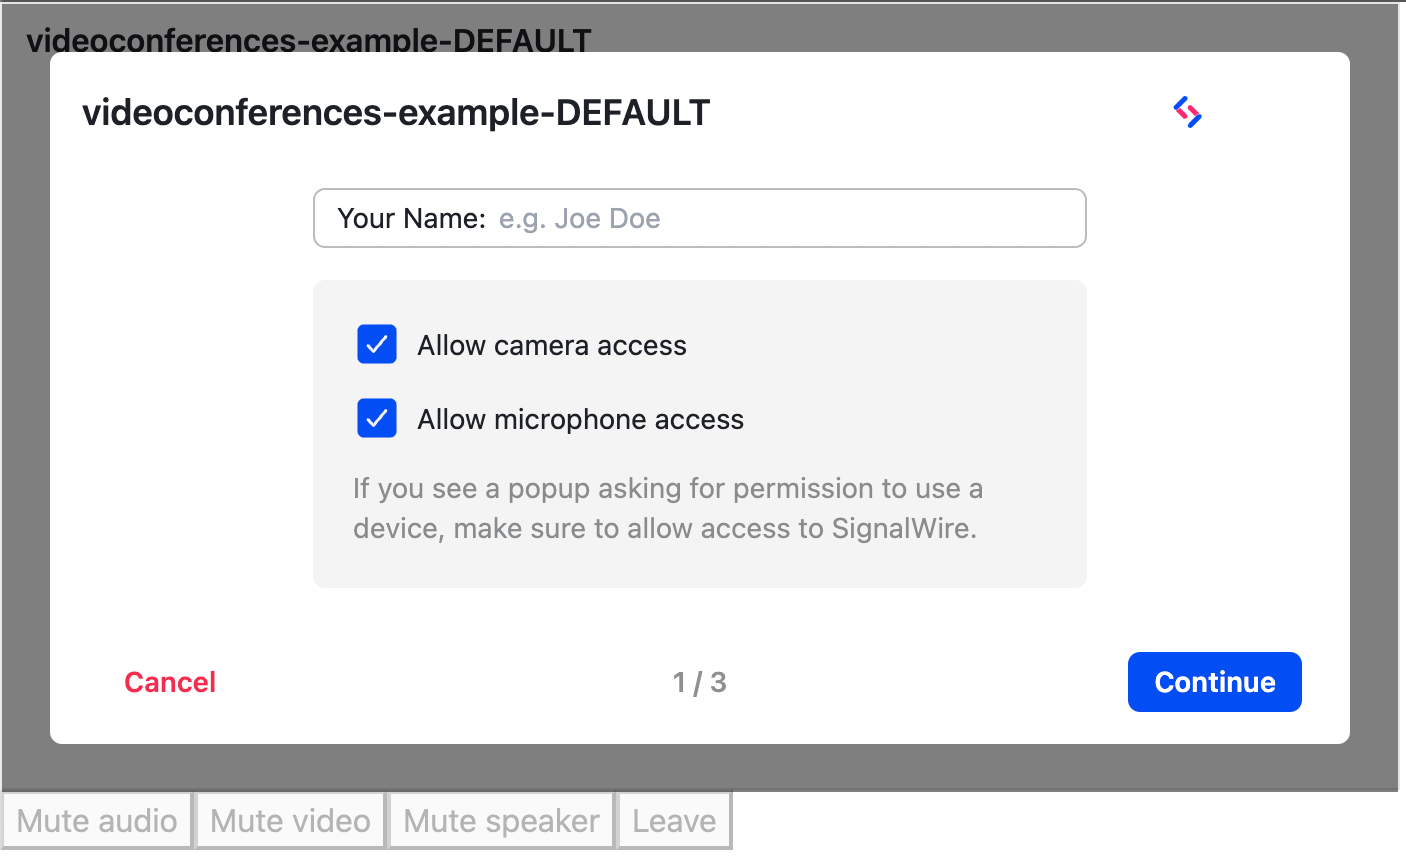 A screenshot of the control buttons used for the user to mute or unmute audio, video, and speaker. Since the user has not yet joined the room, the buttons are disabled and grayed out.